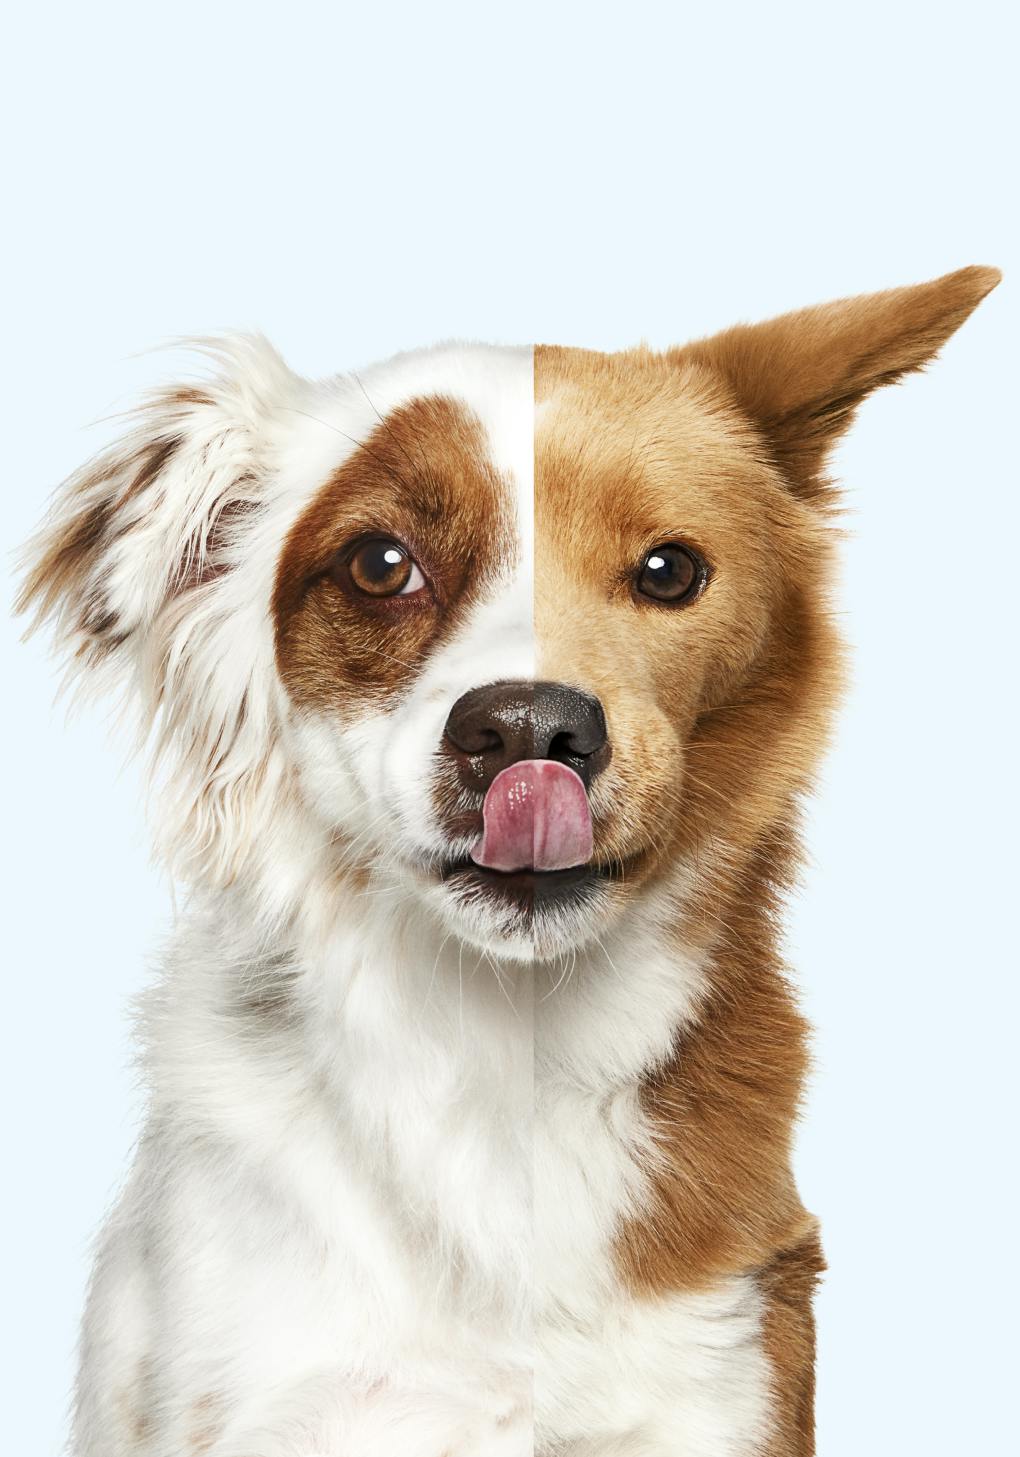 Two dogs composed into one dog image